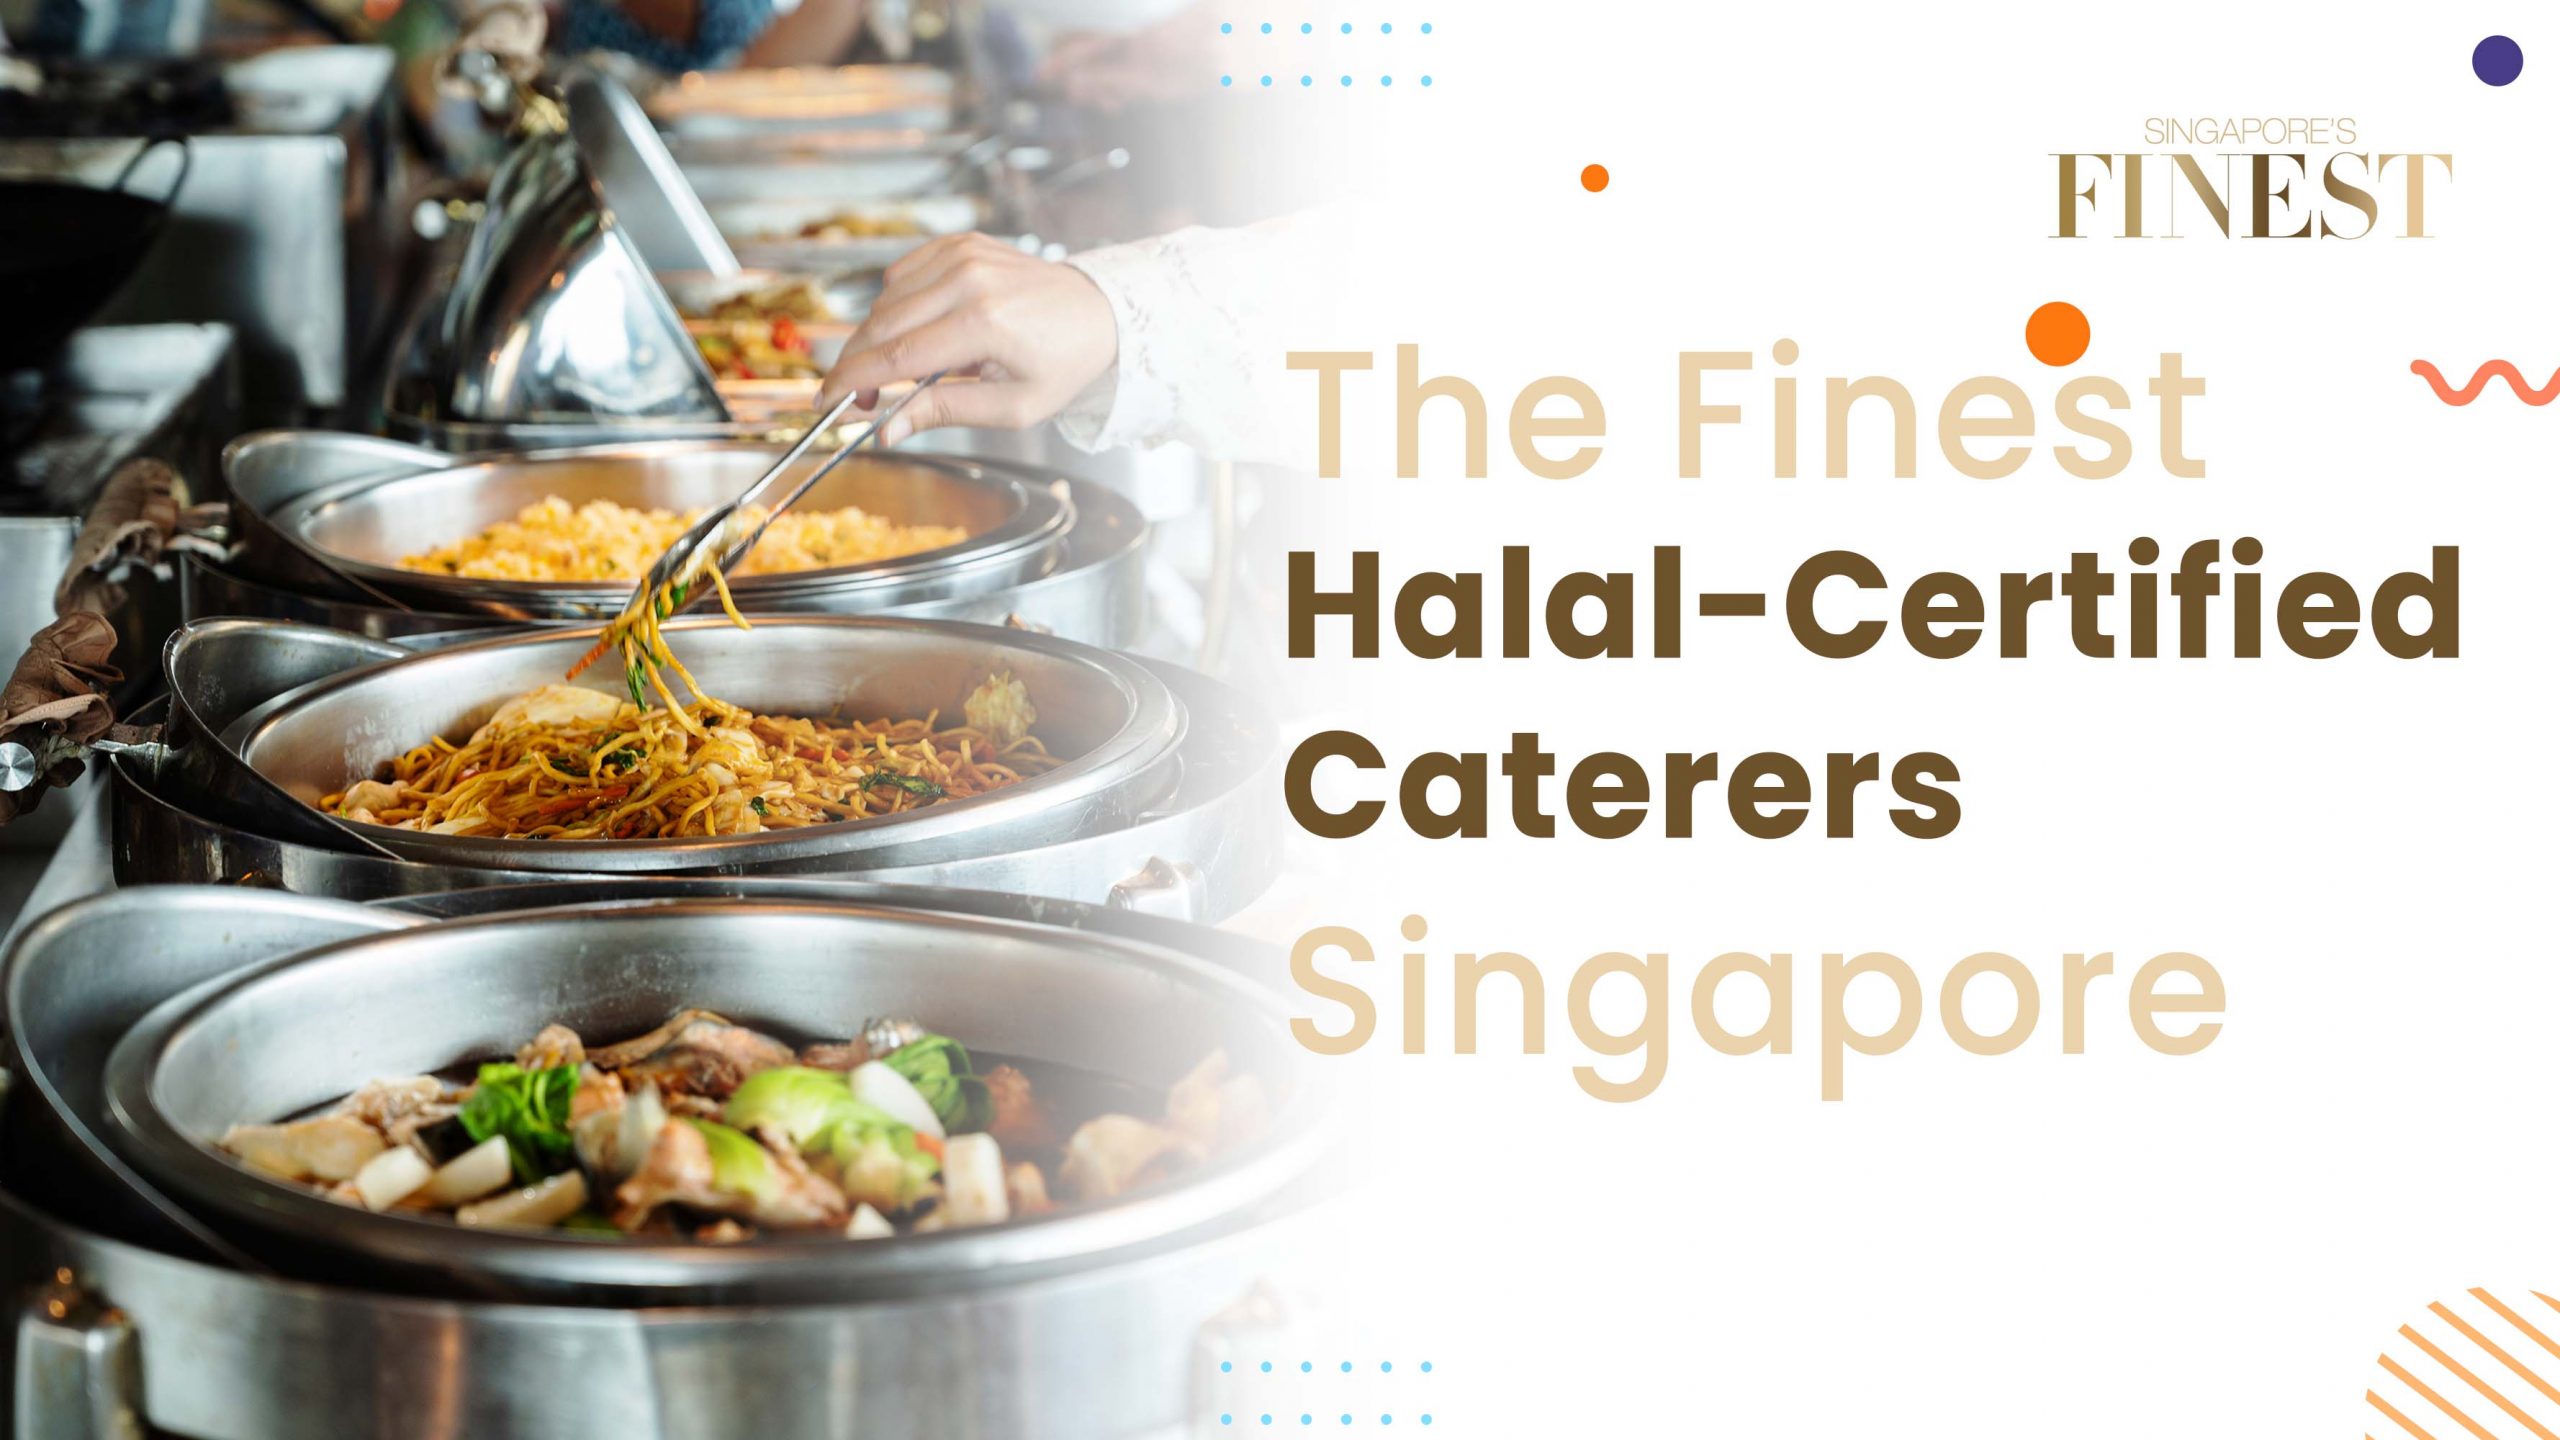 The 10 Finest Halal-Certified Caterers in Singapore